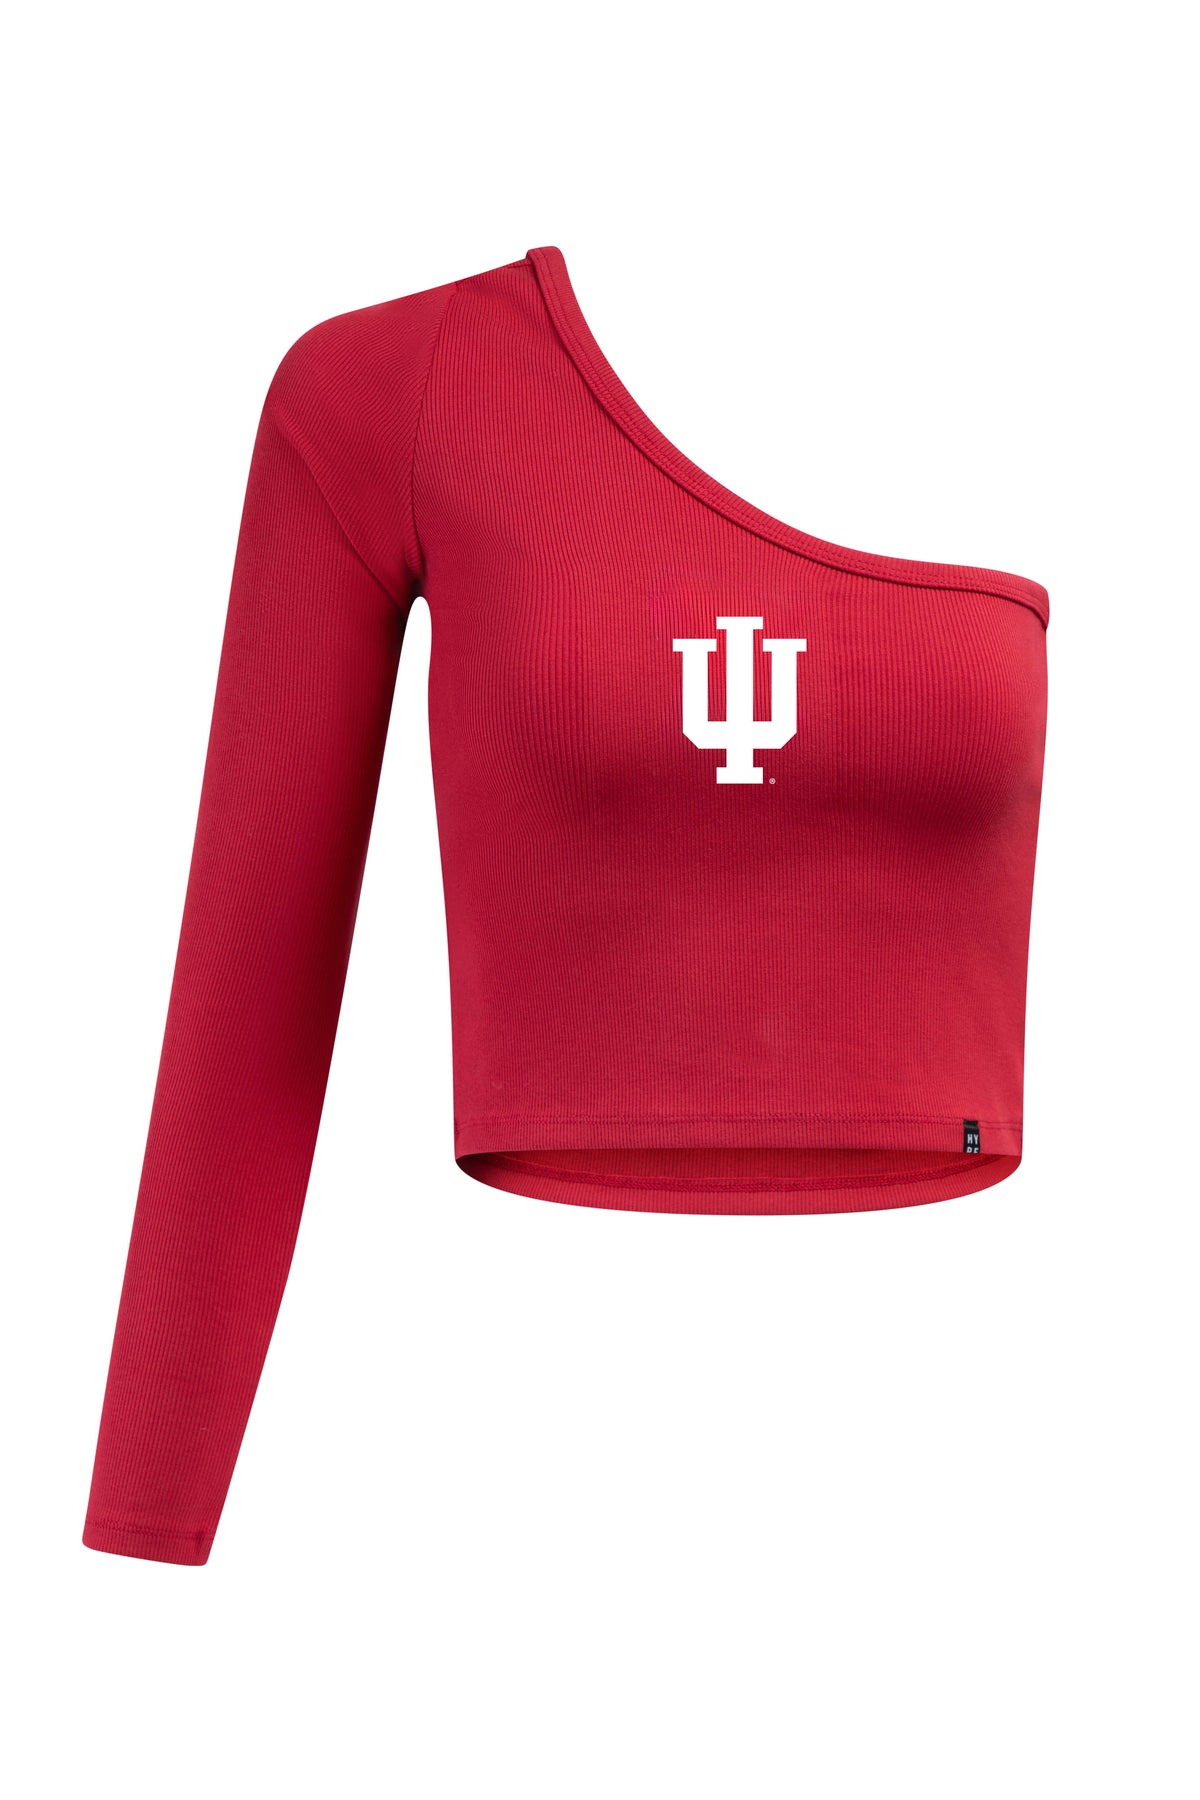 Indiana University Knock Out Top